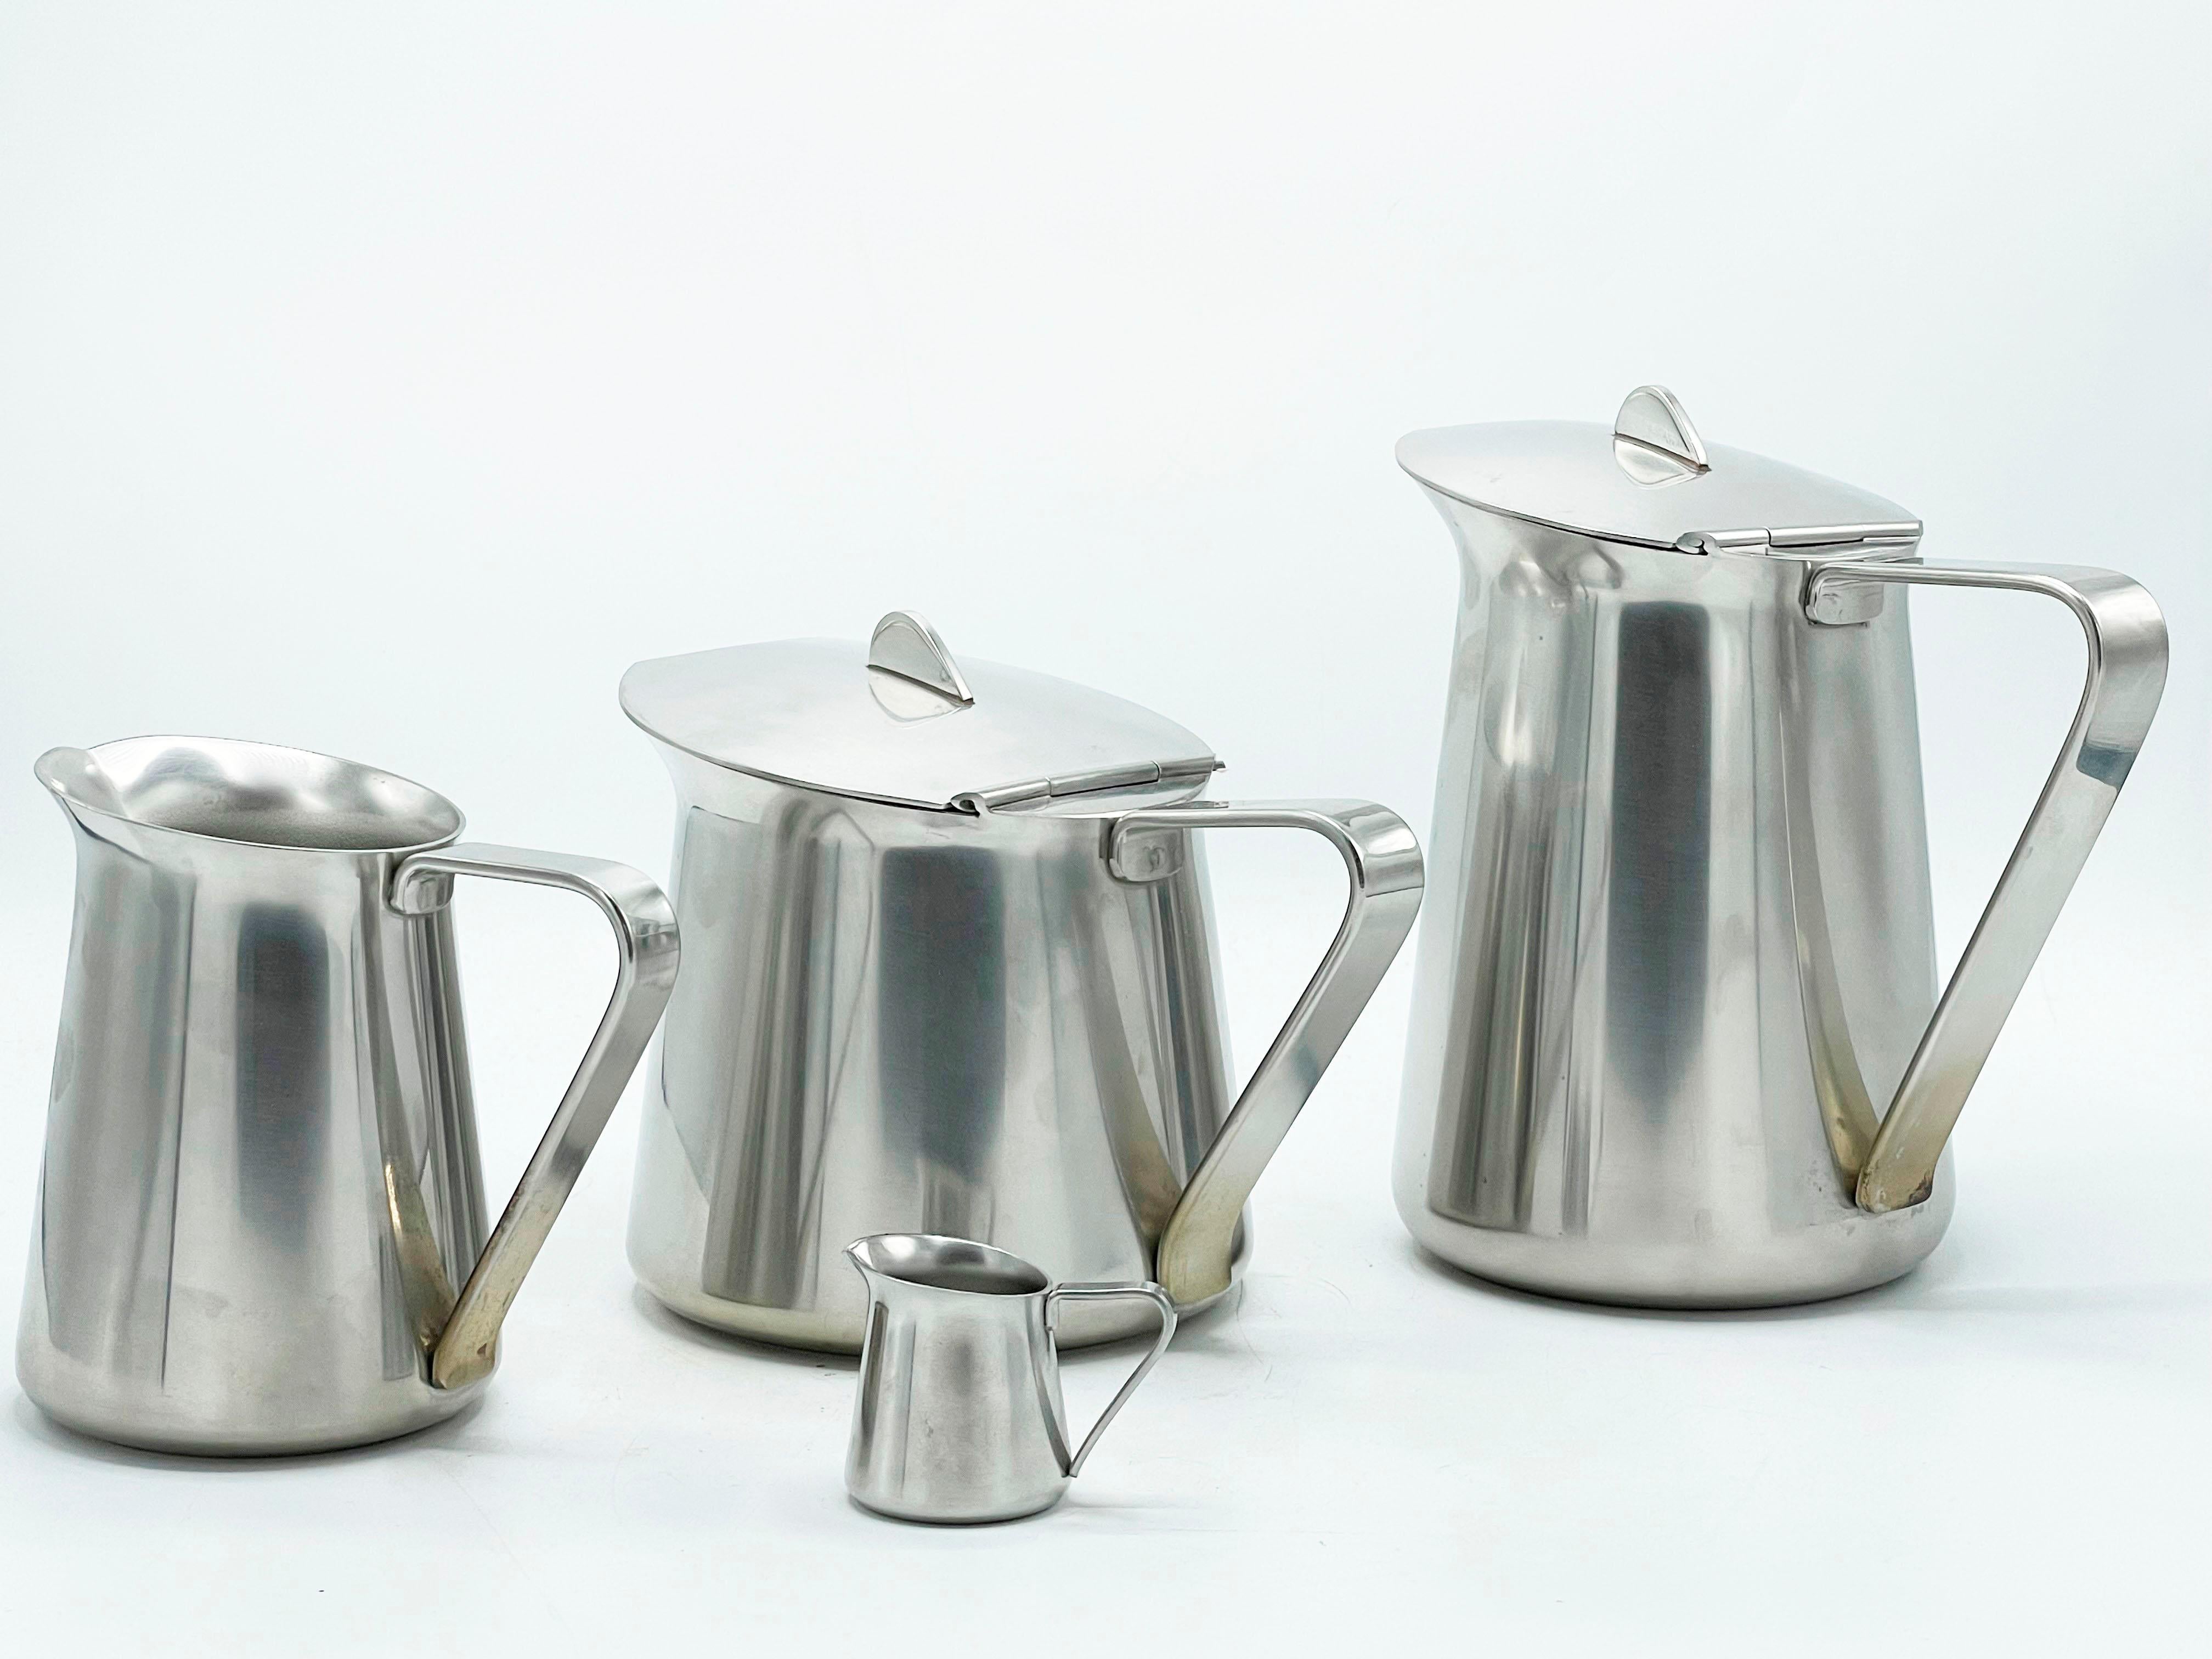 Stainless steel tea set, Alessi, 20th century.
Beautiful Design tea set from the 1950s to 1960s Alessi brand, the design in addition to combining functionality presents a classic and timeless touch. The use of stainless steel brings a sense of